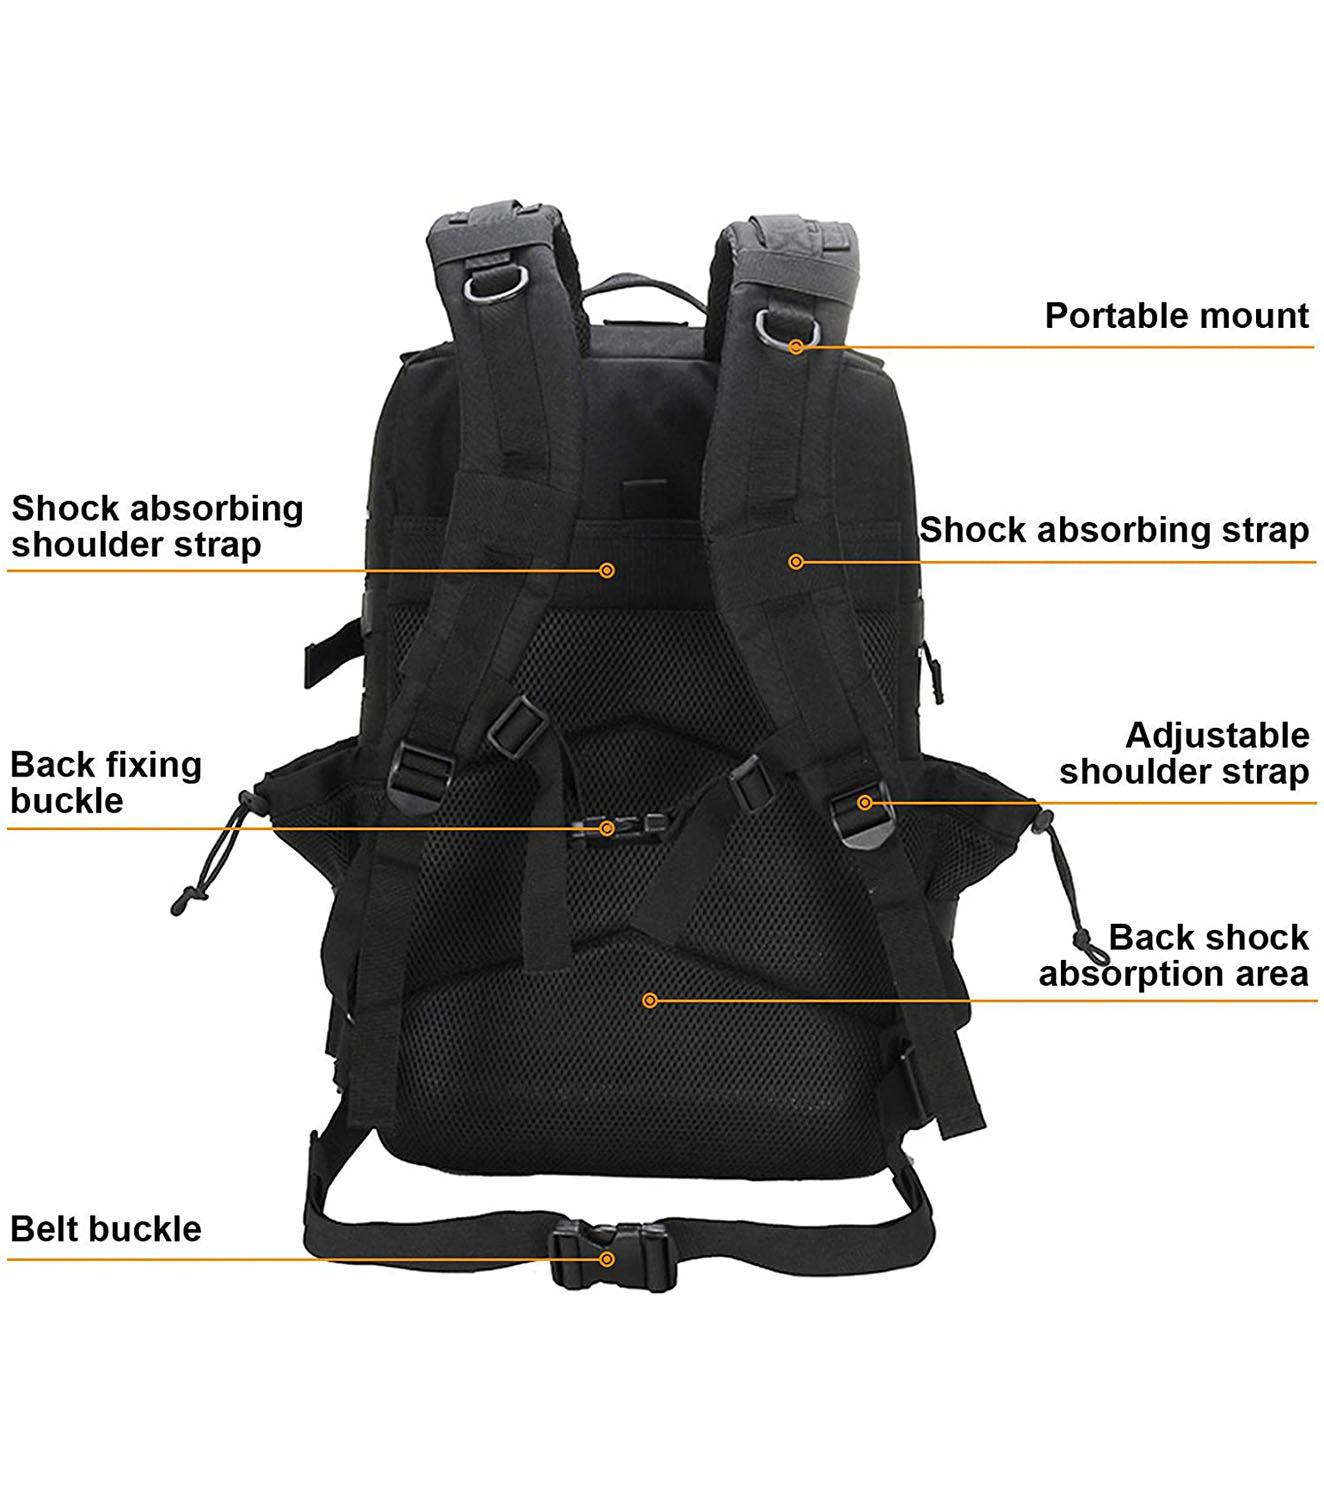 Tactical Backpack - wodarmour